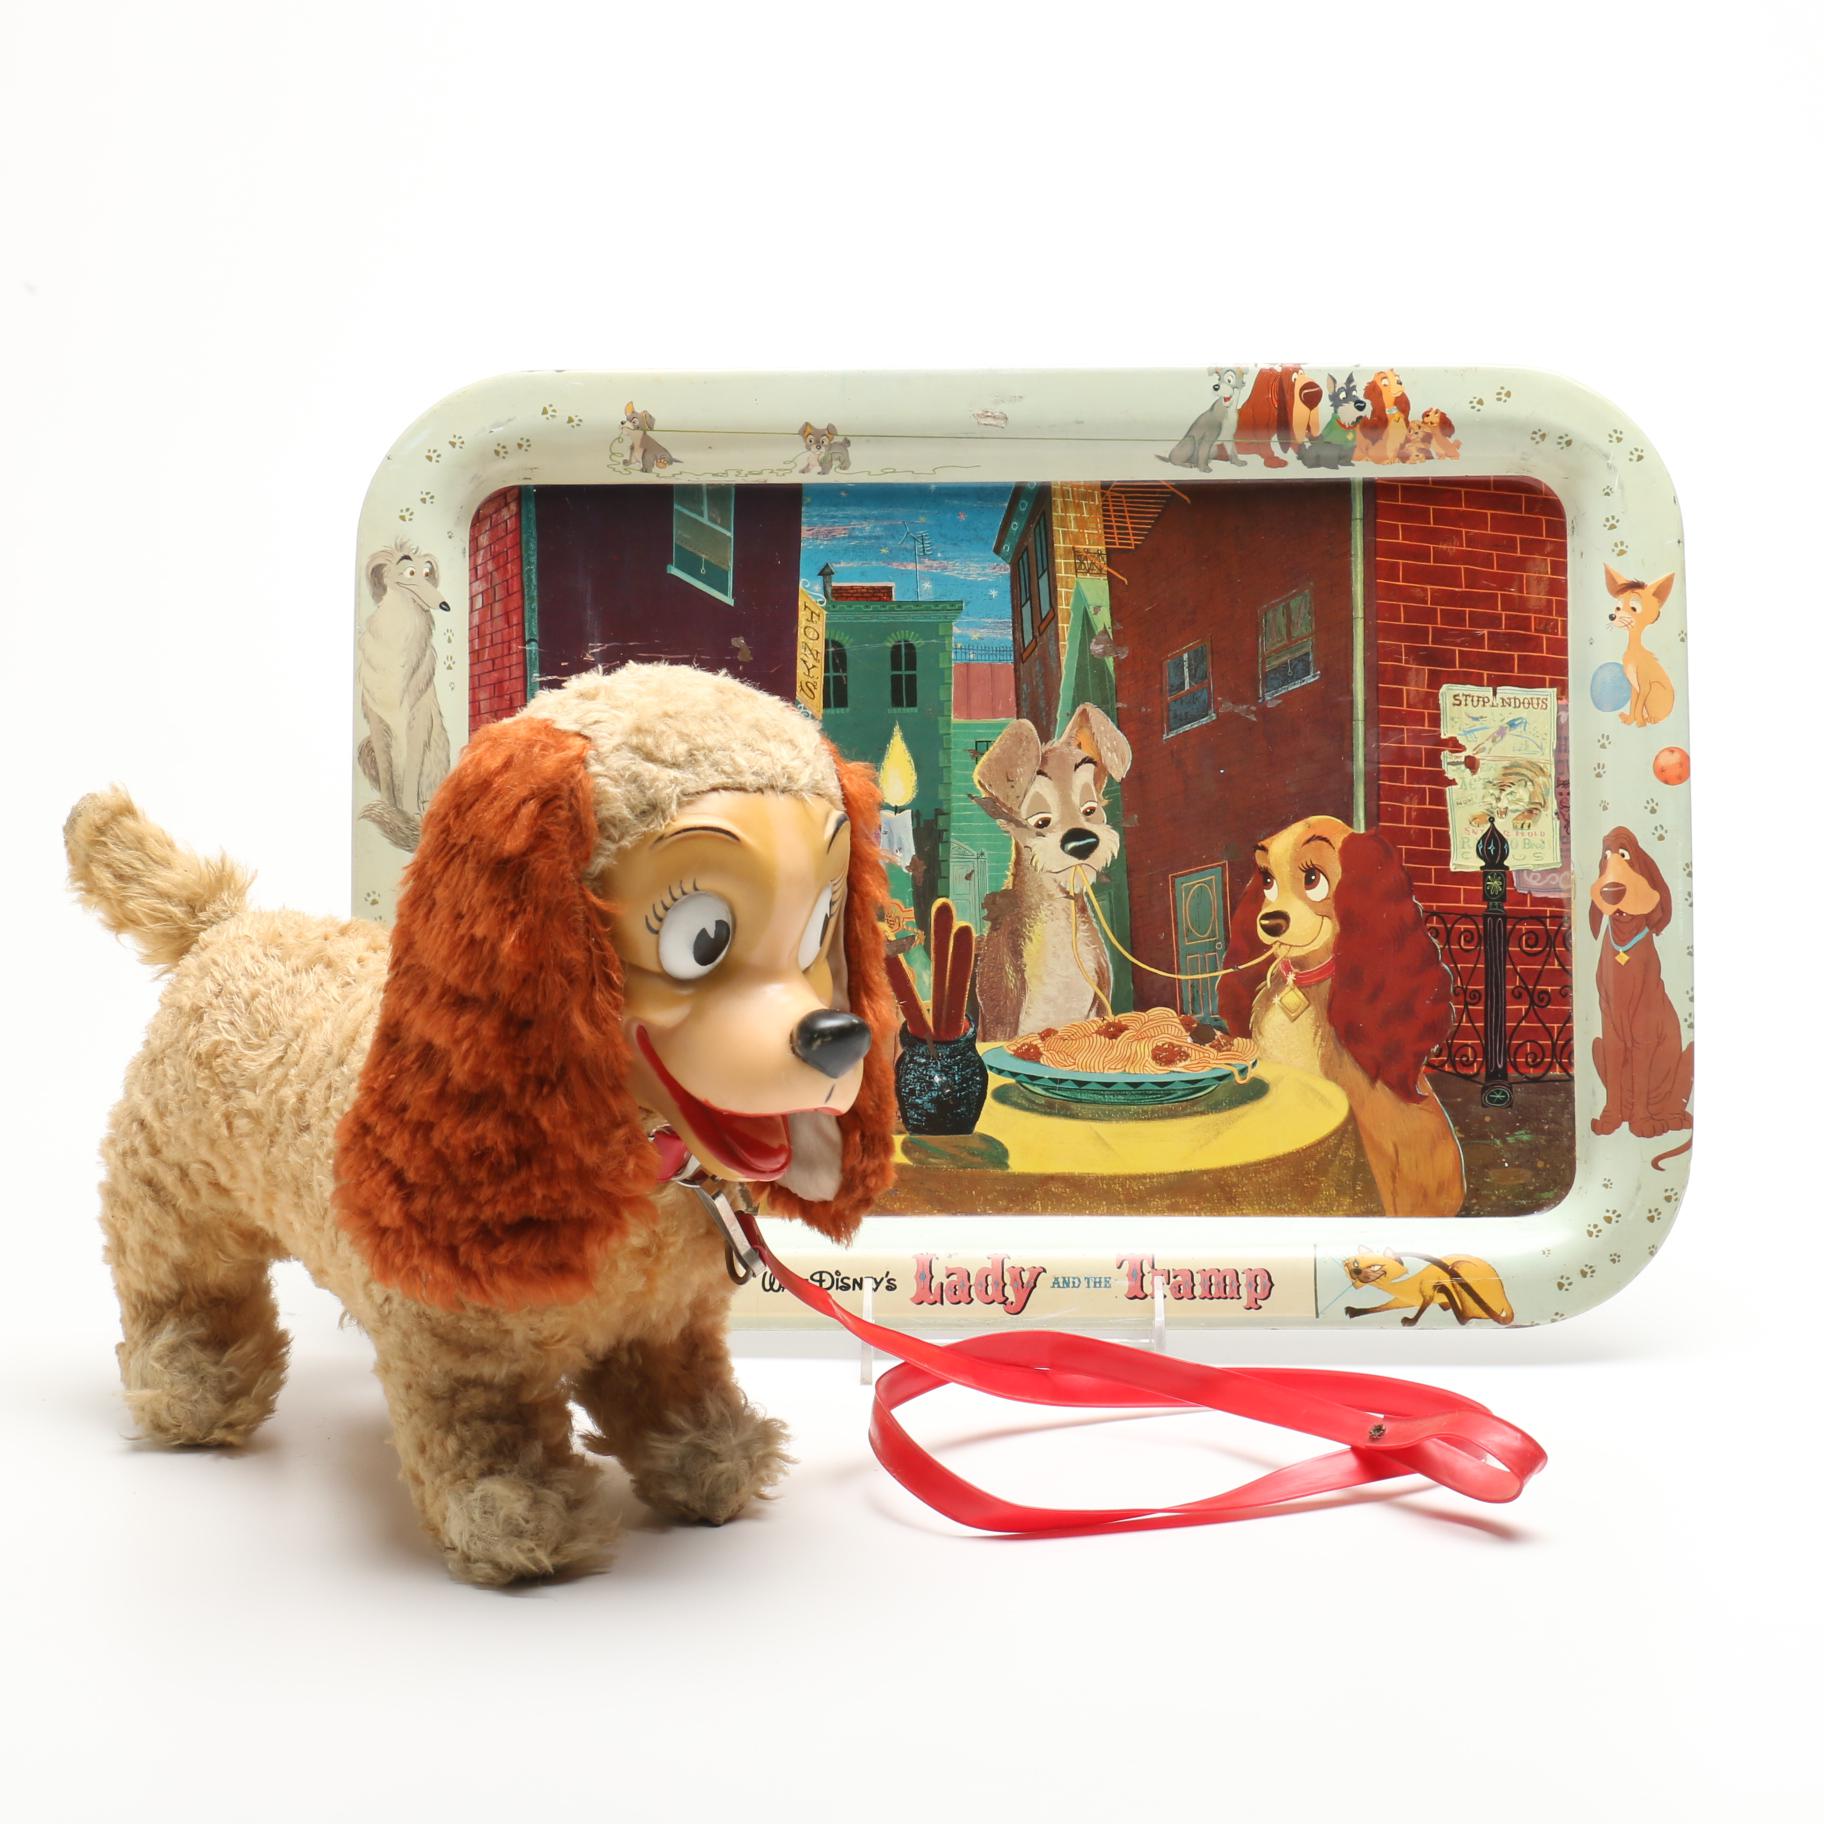 vintage lady and the tramp stuffed animals